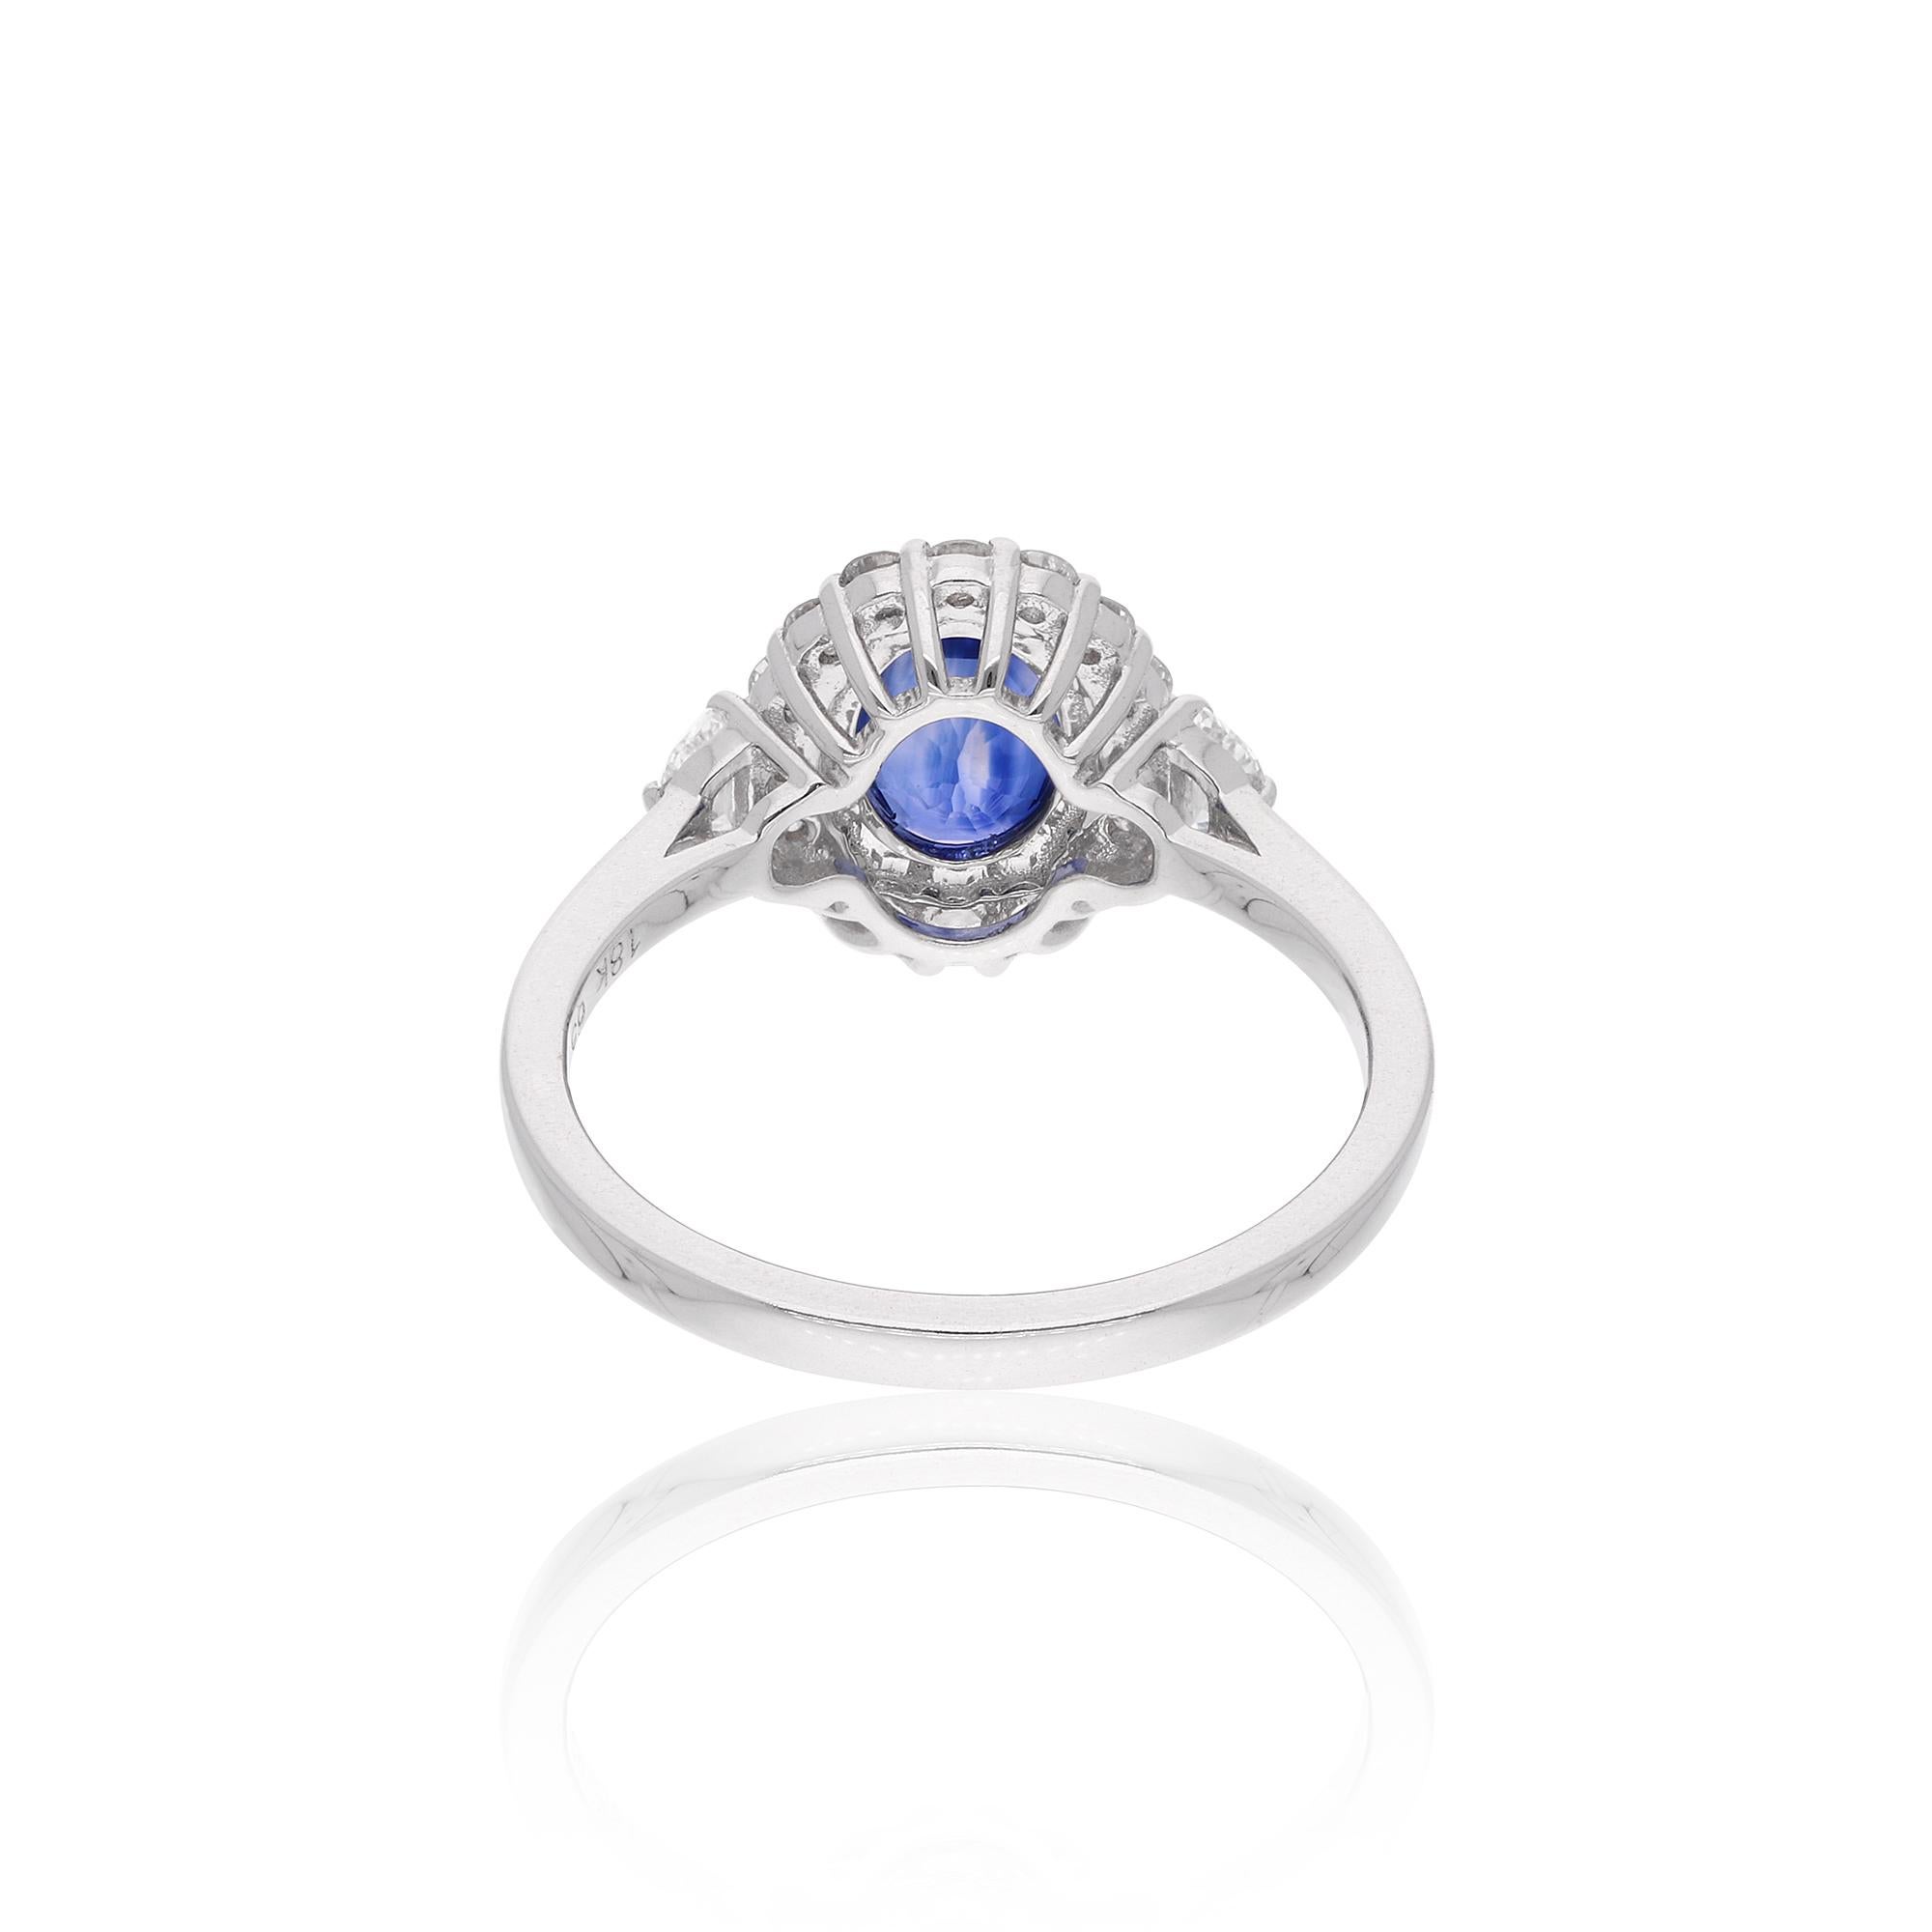 A cocktail ring featuring an oval blue sapphire gemstone and diamonds in 18 karat white gold is a stunning and elegant piece of jewelry. The ring typically showcases a central oval-shaped blue sapphire gemstone as the centerpiece.

Item Code :-